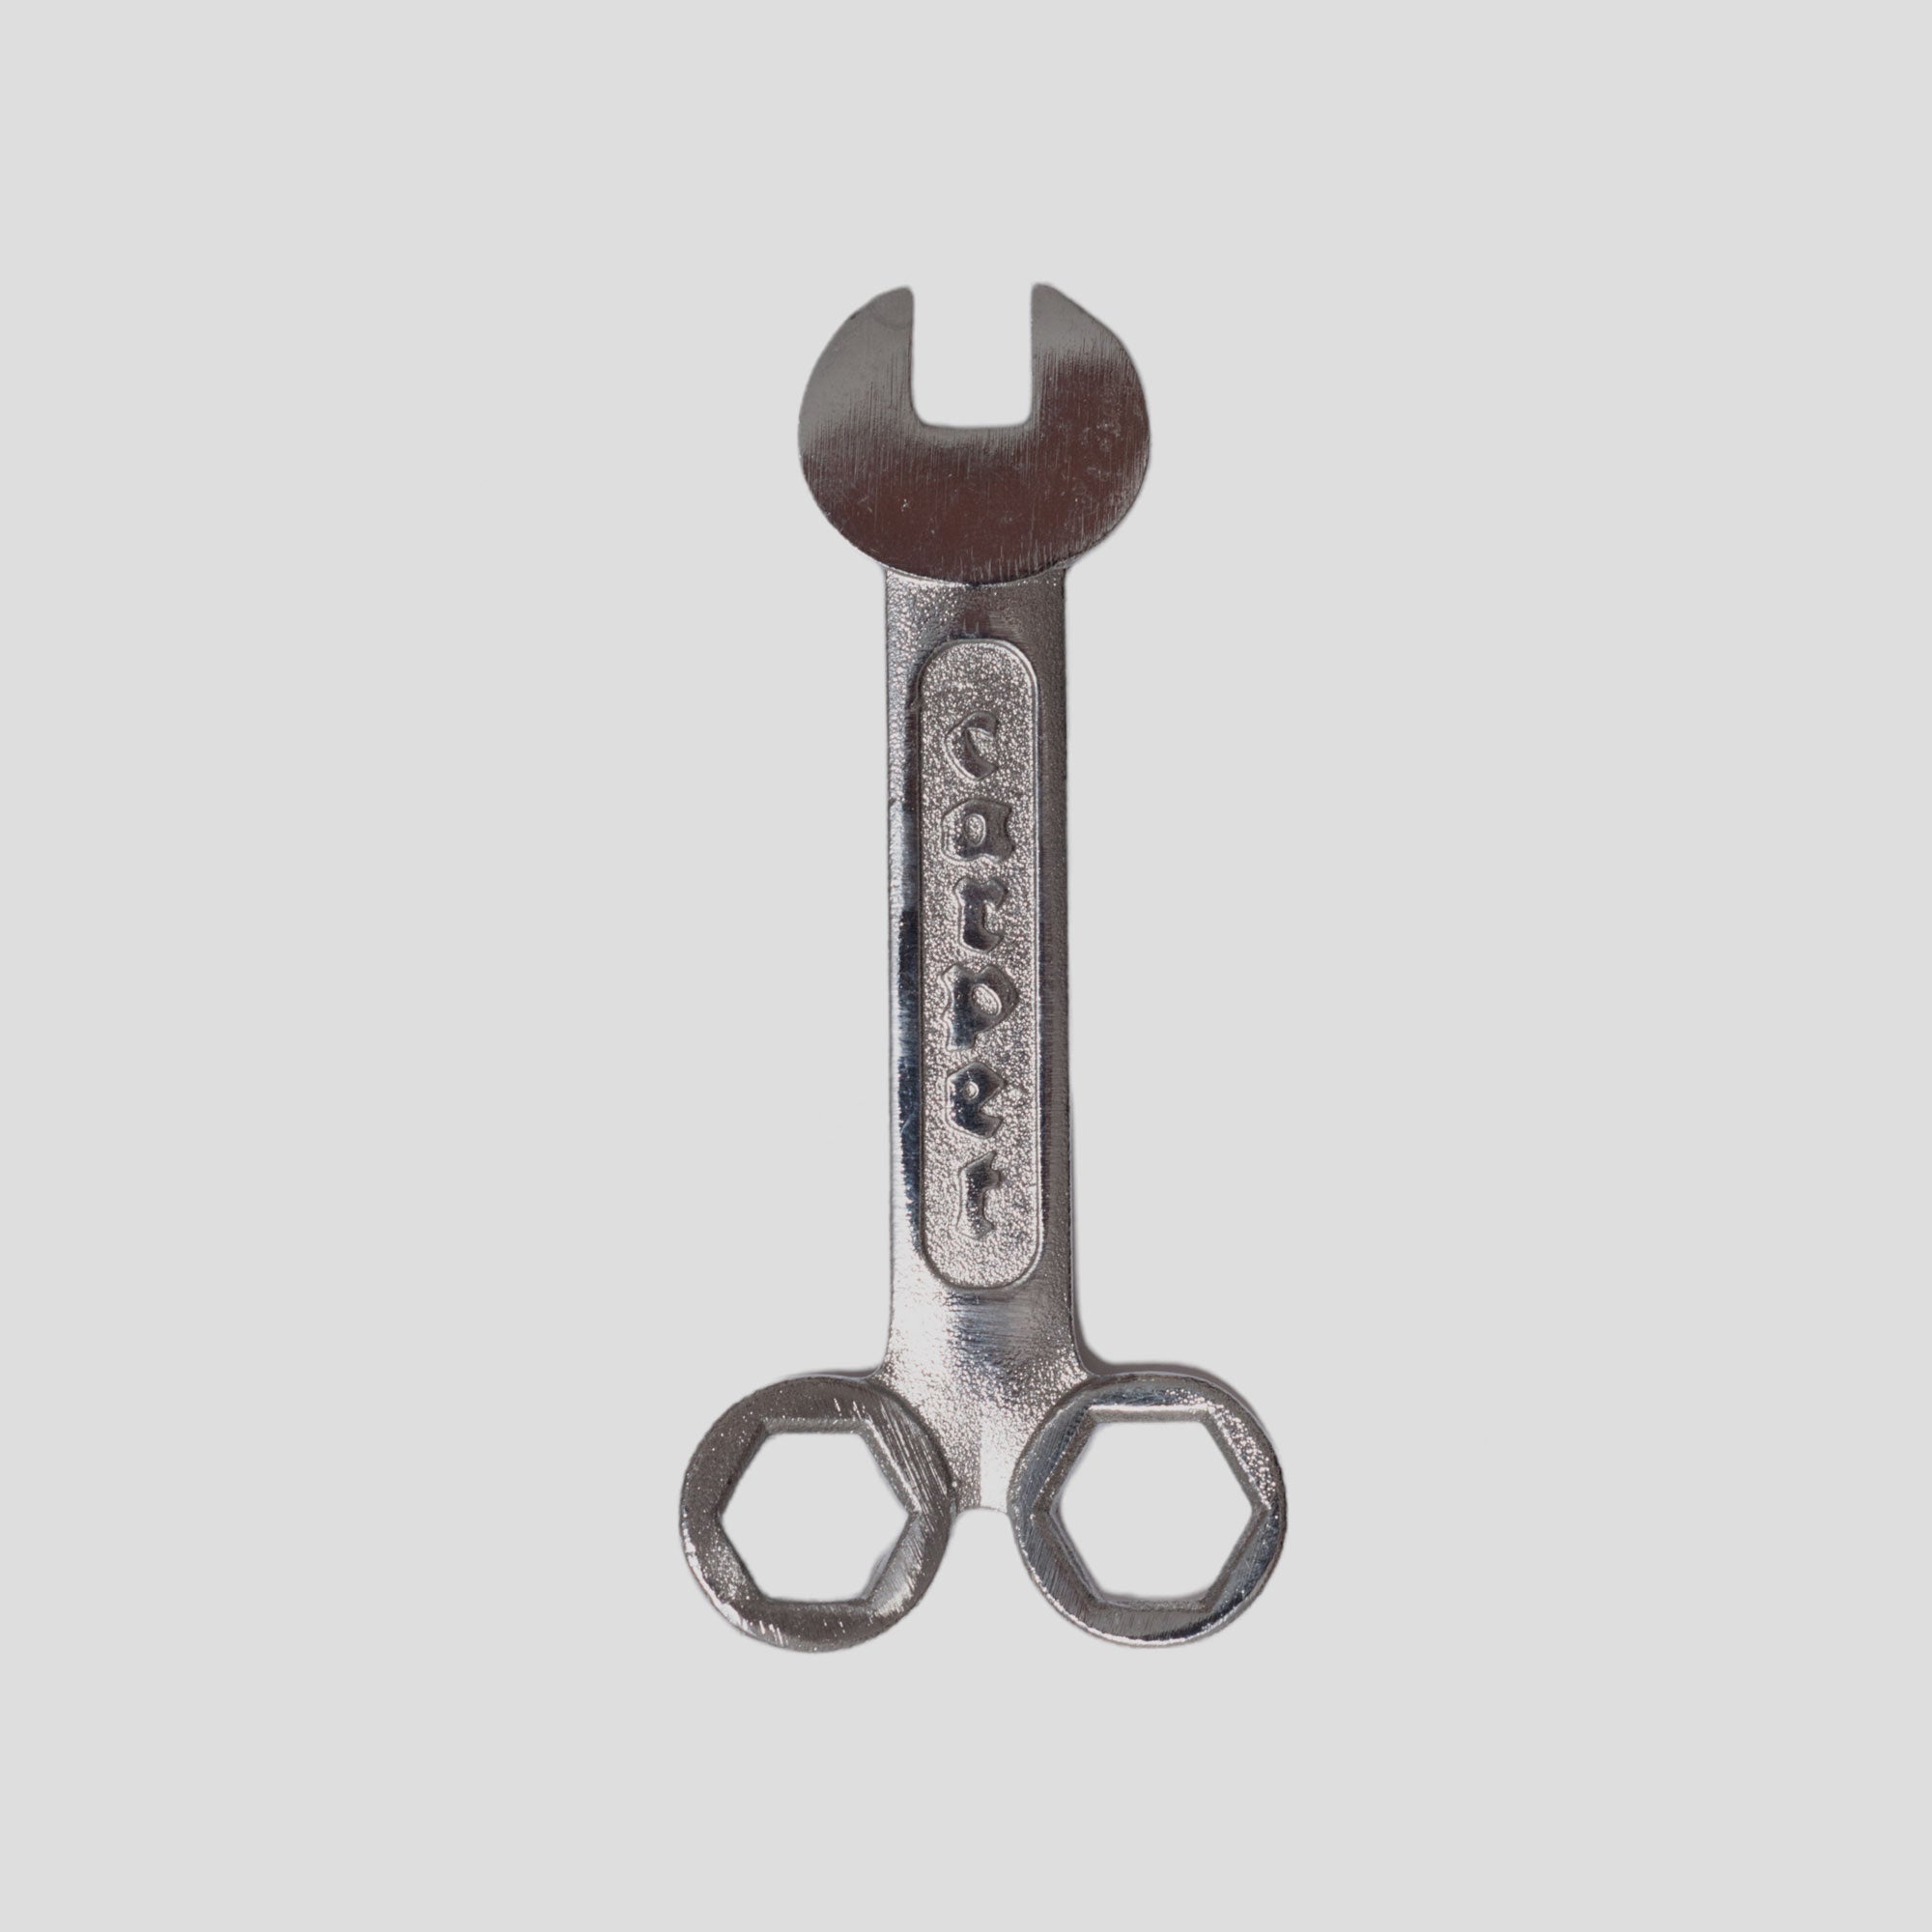 CARPET COMPANY "D-TOOL" STAINLESS STEEL